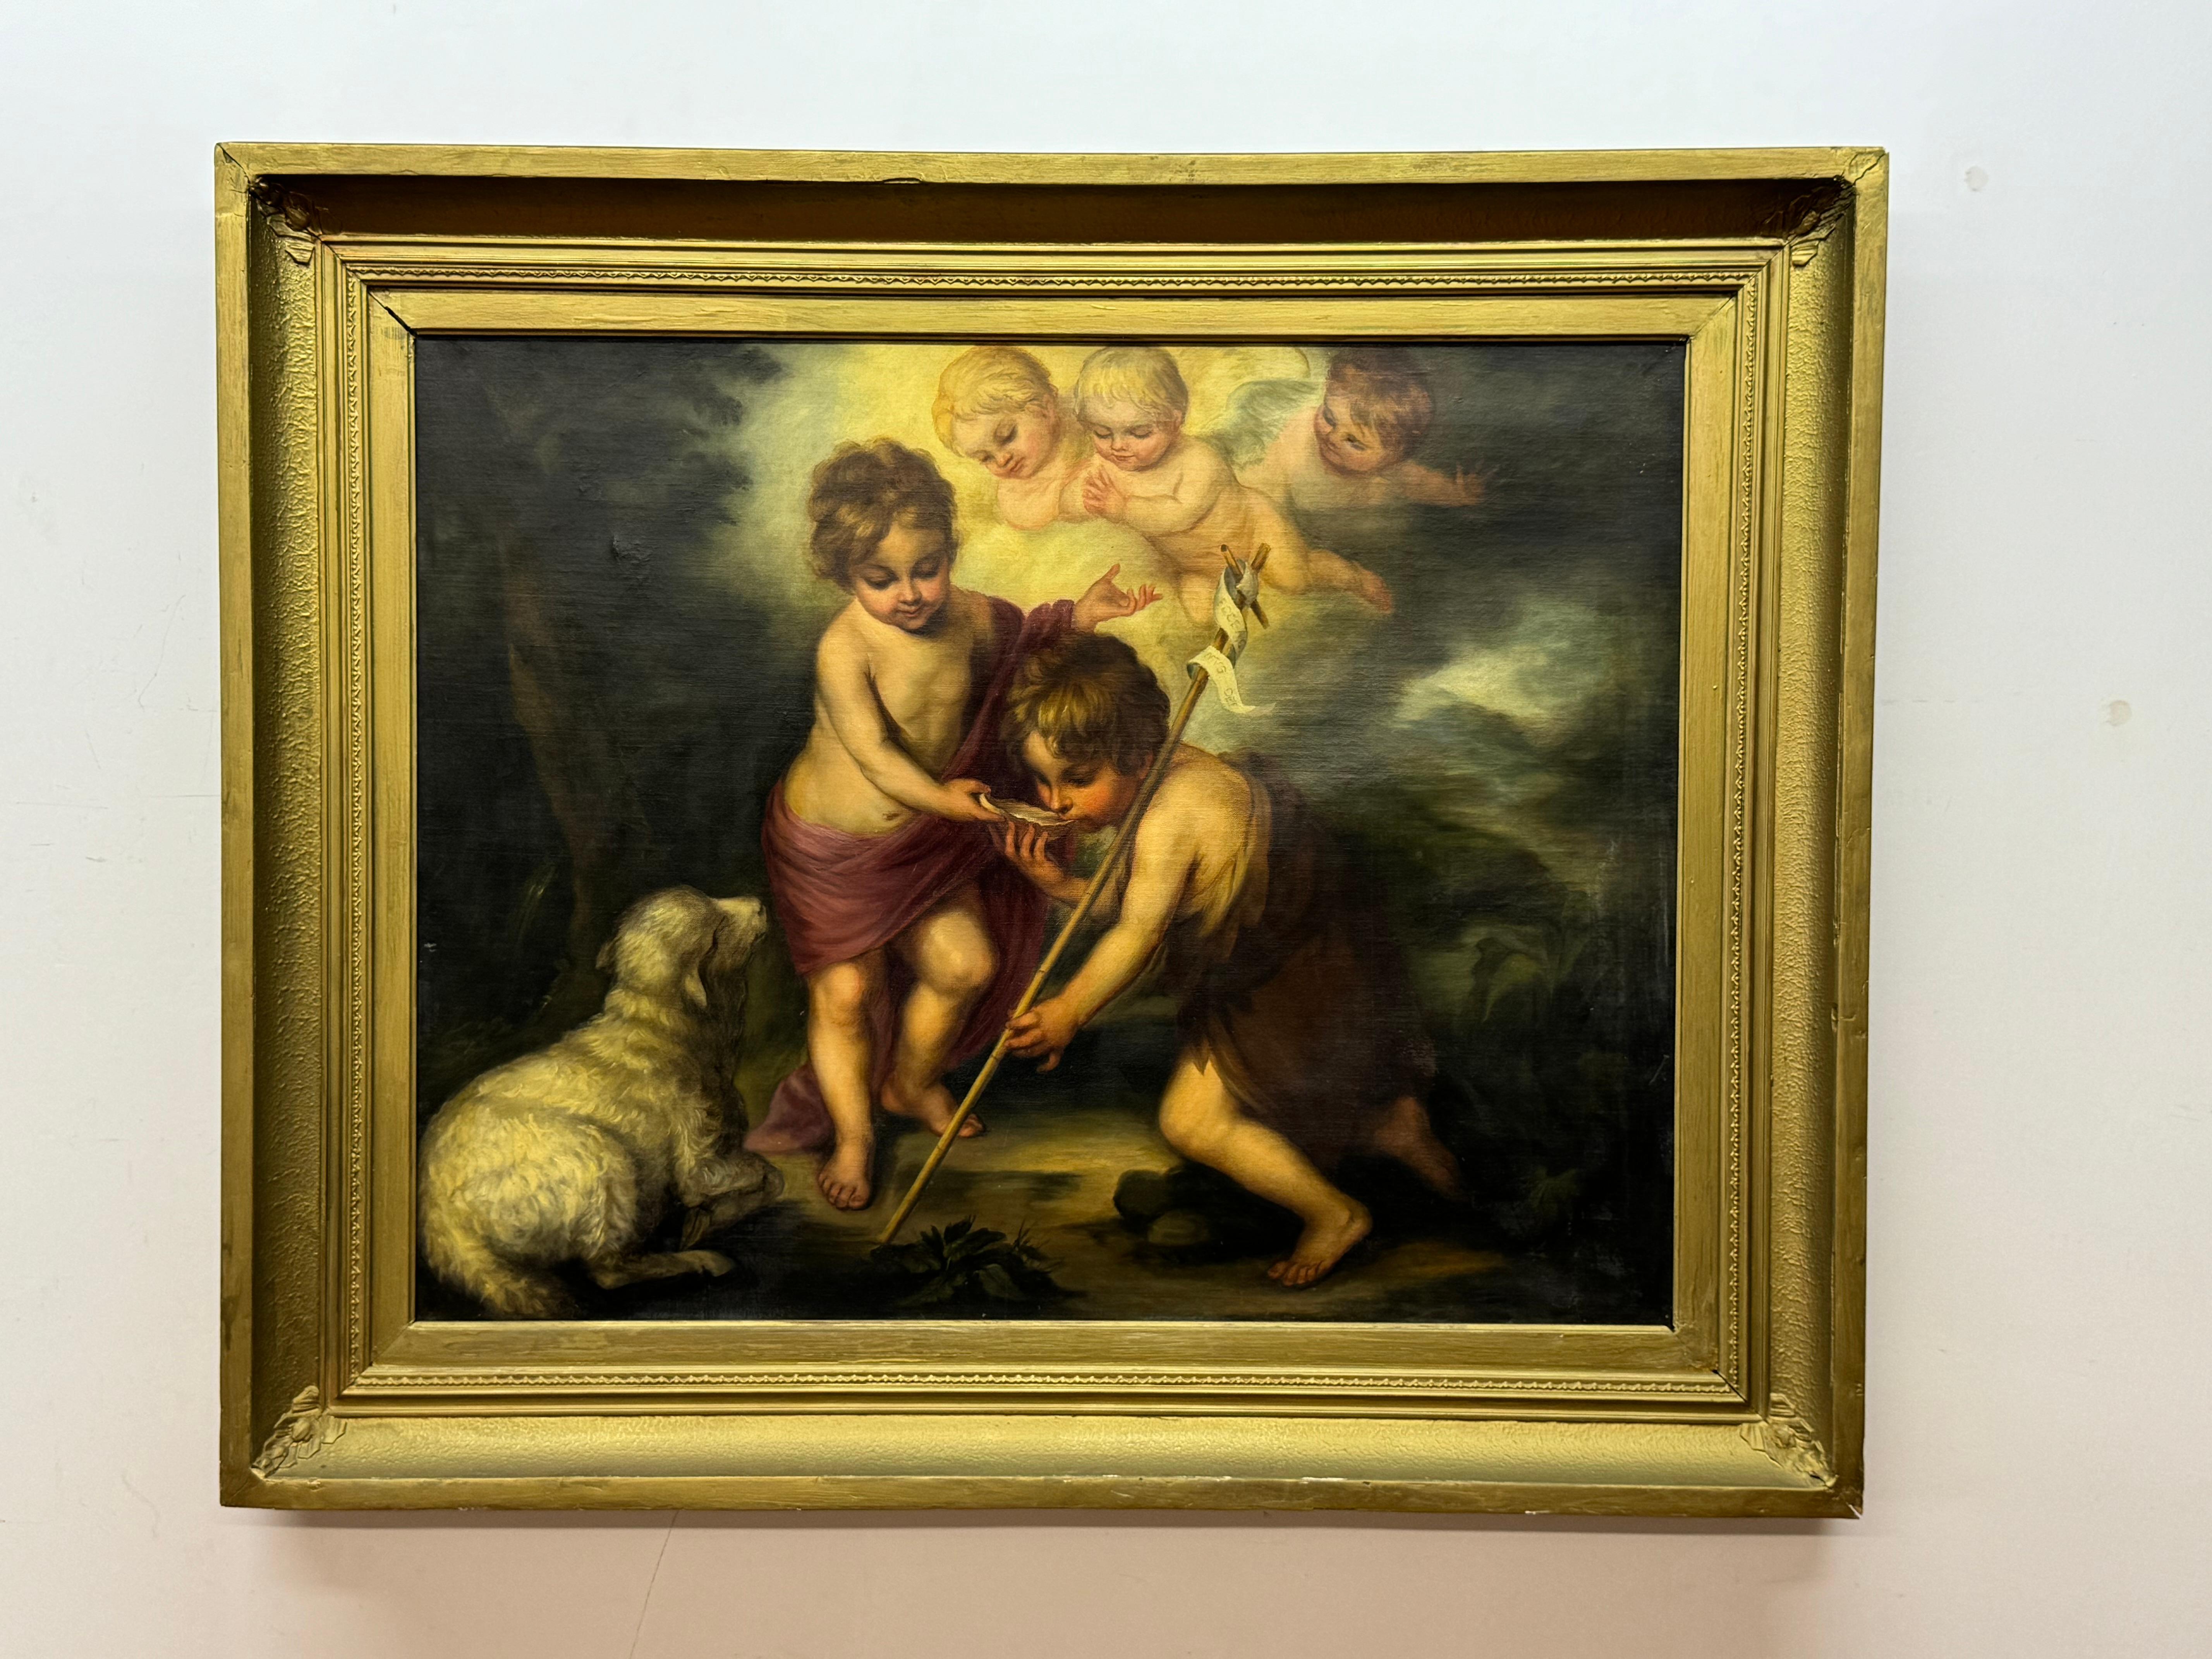 (After) Bartolomé Esteban Murillo Figurative Painting - 19th century oil on canvas The Christ child, and the infant John the Baptist